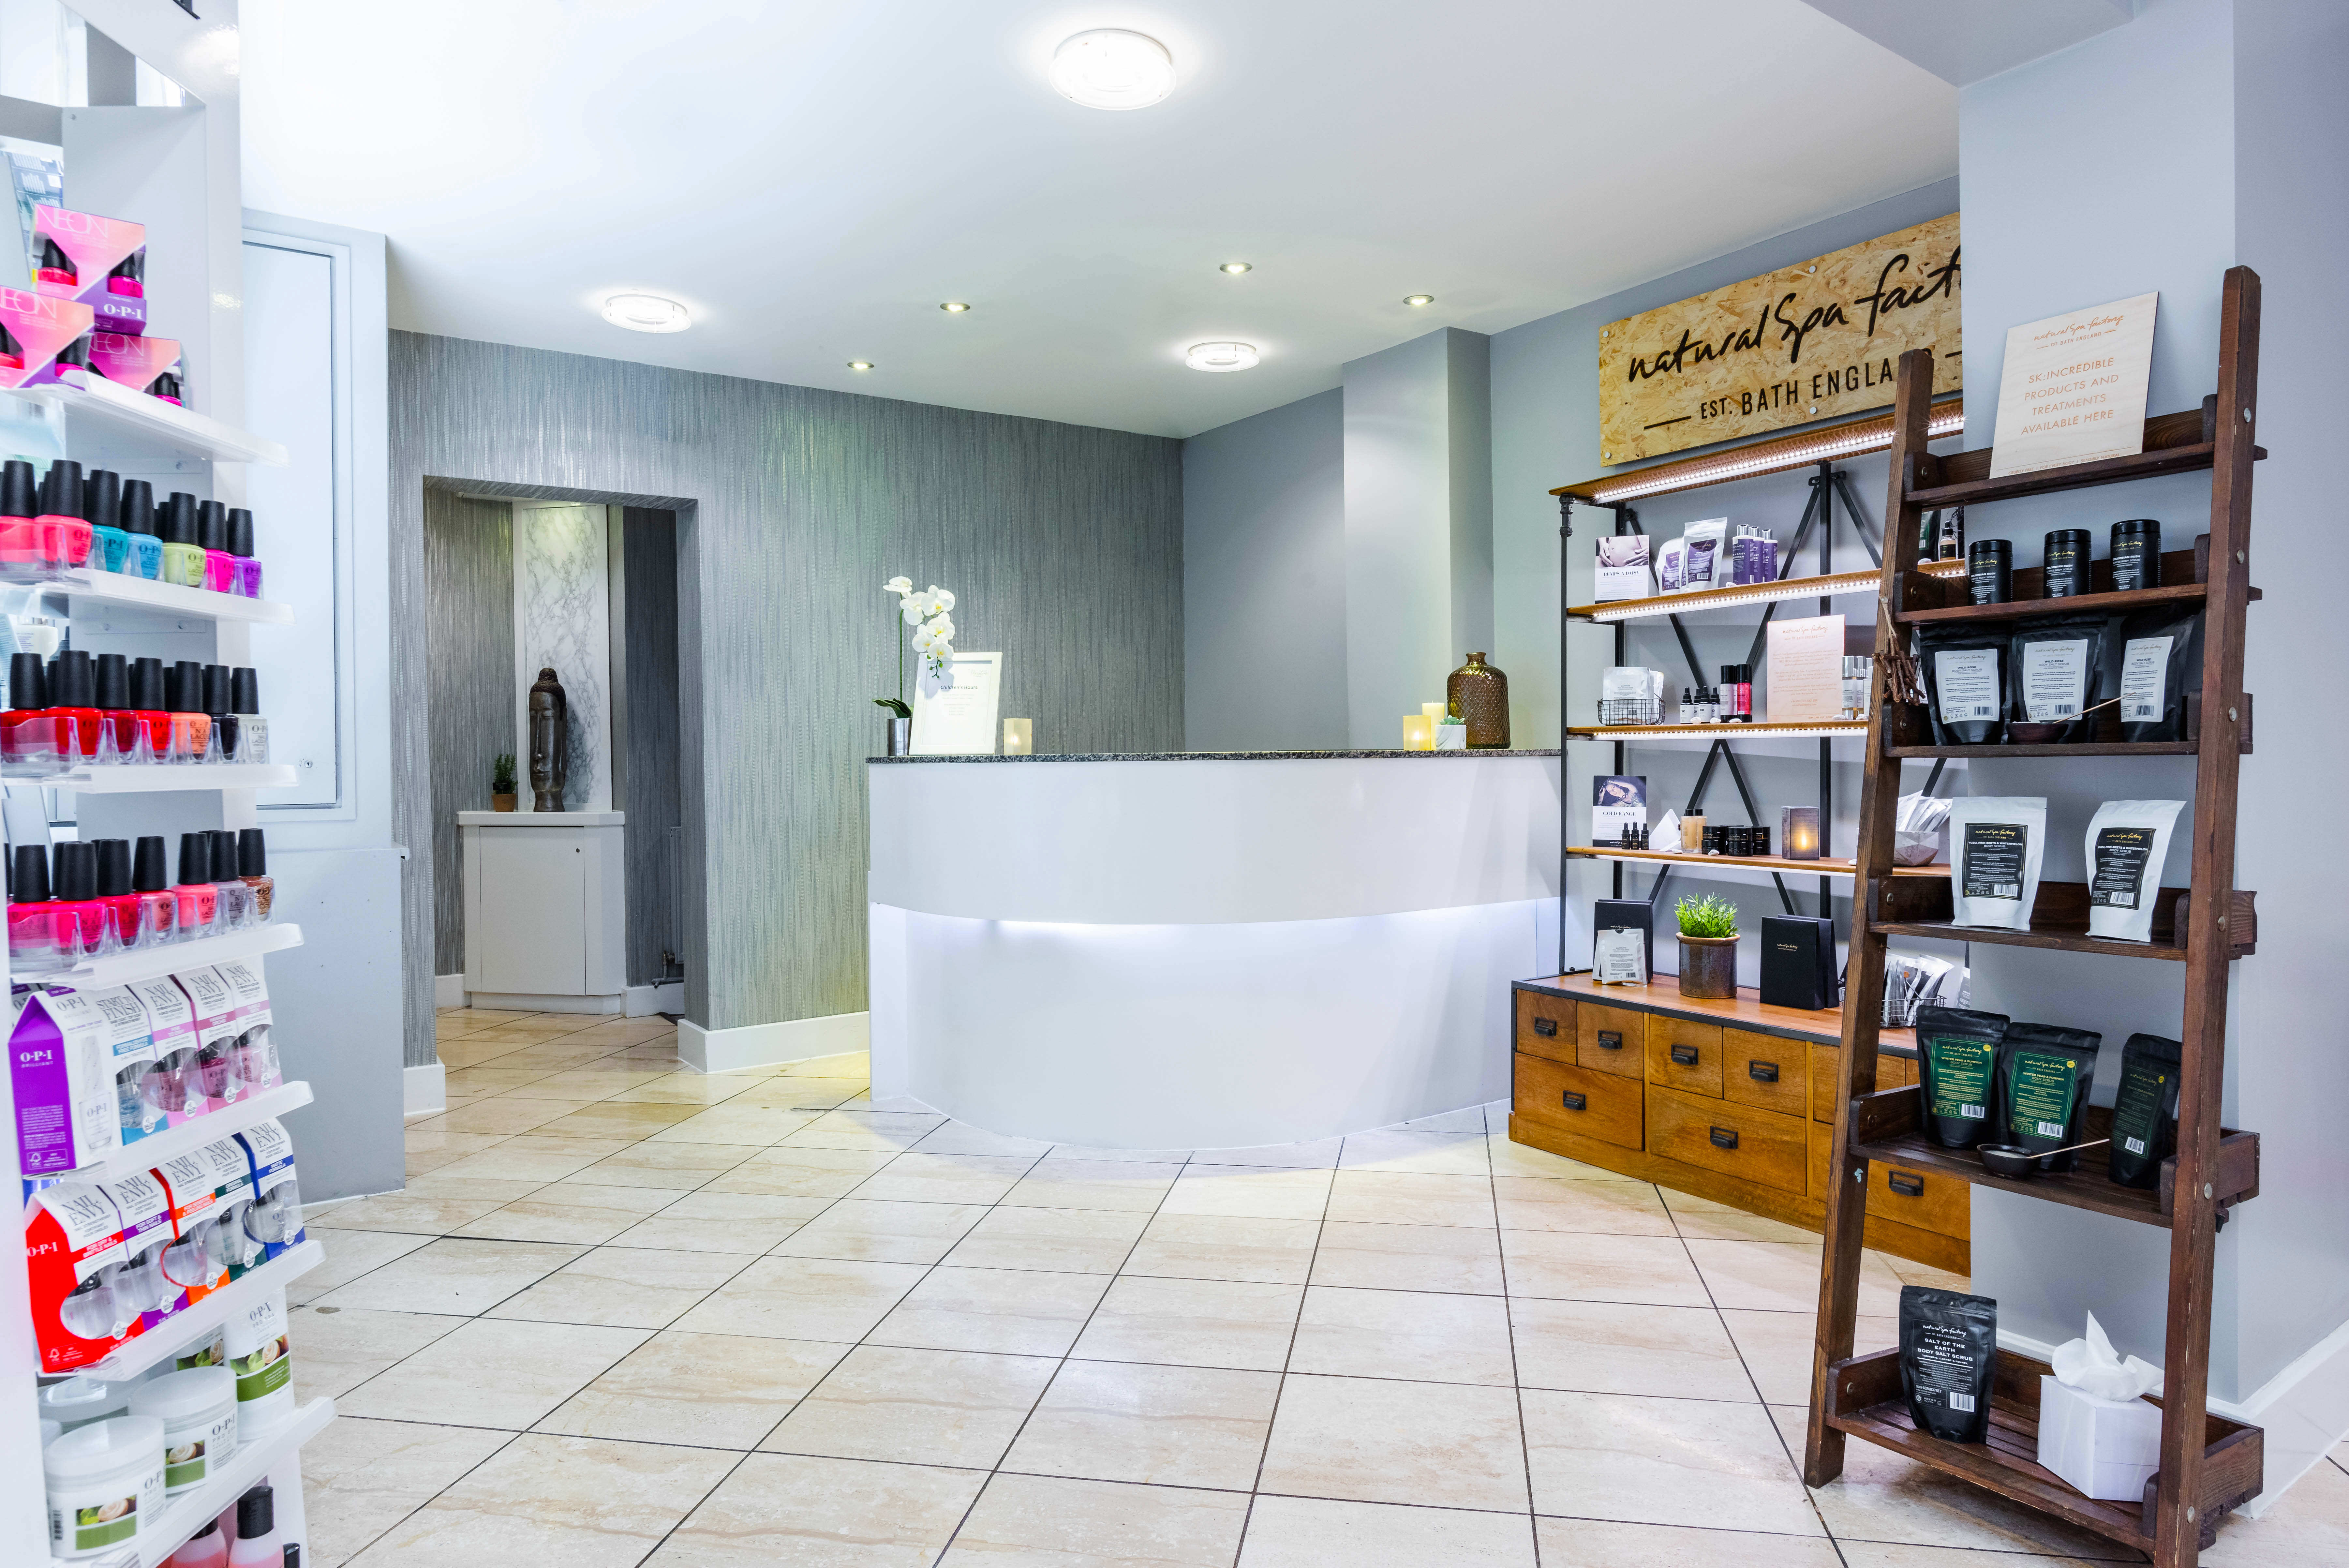 The Elemis Mother To Be Spa Day, Lea Marston Hotel And Spa